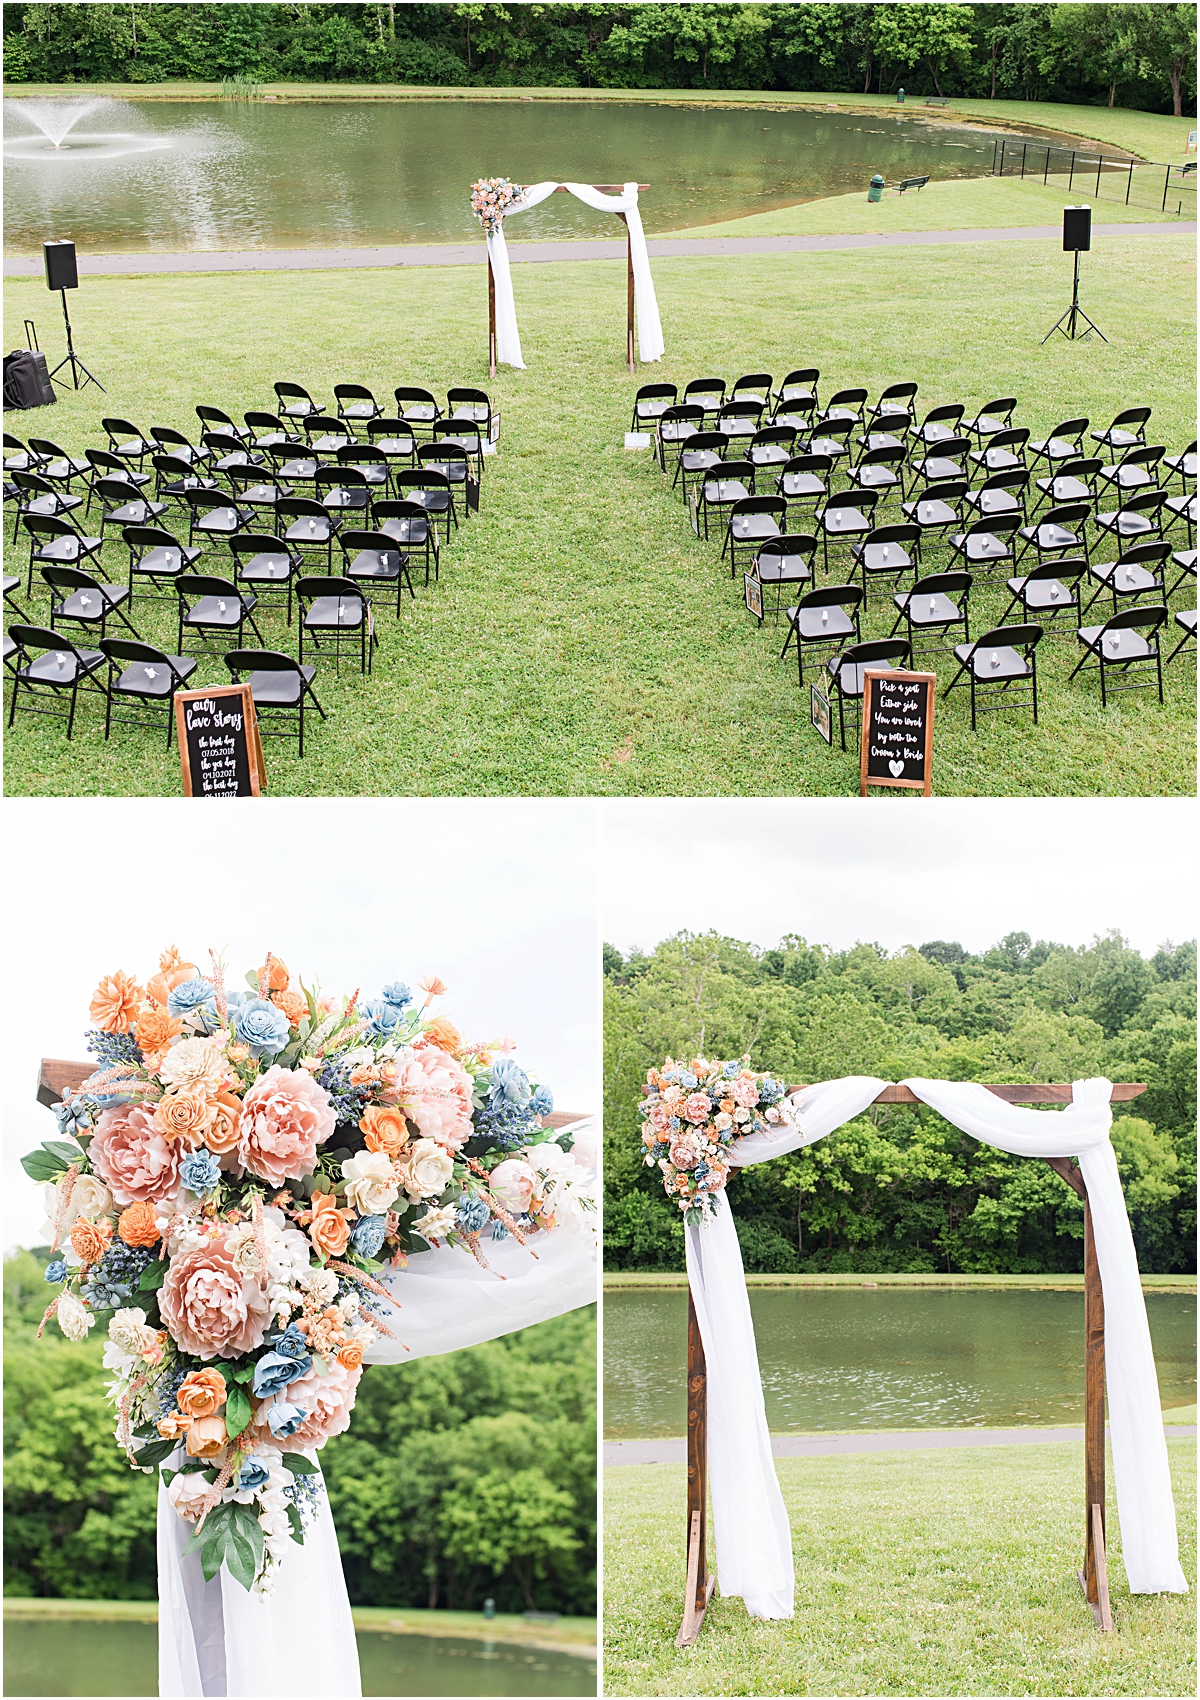 Detail of the wedding ceremony set up in front of the pond at Poor Farm House Park and detail photos of the altar with an array of light pink, blue and orange flowers.